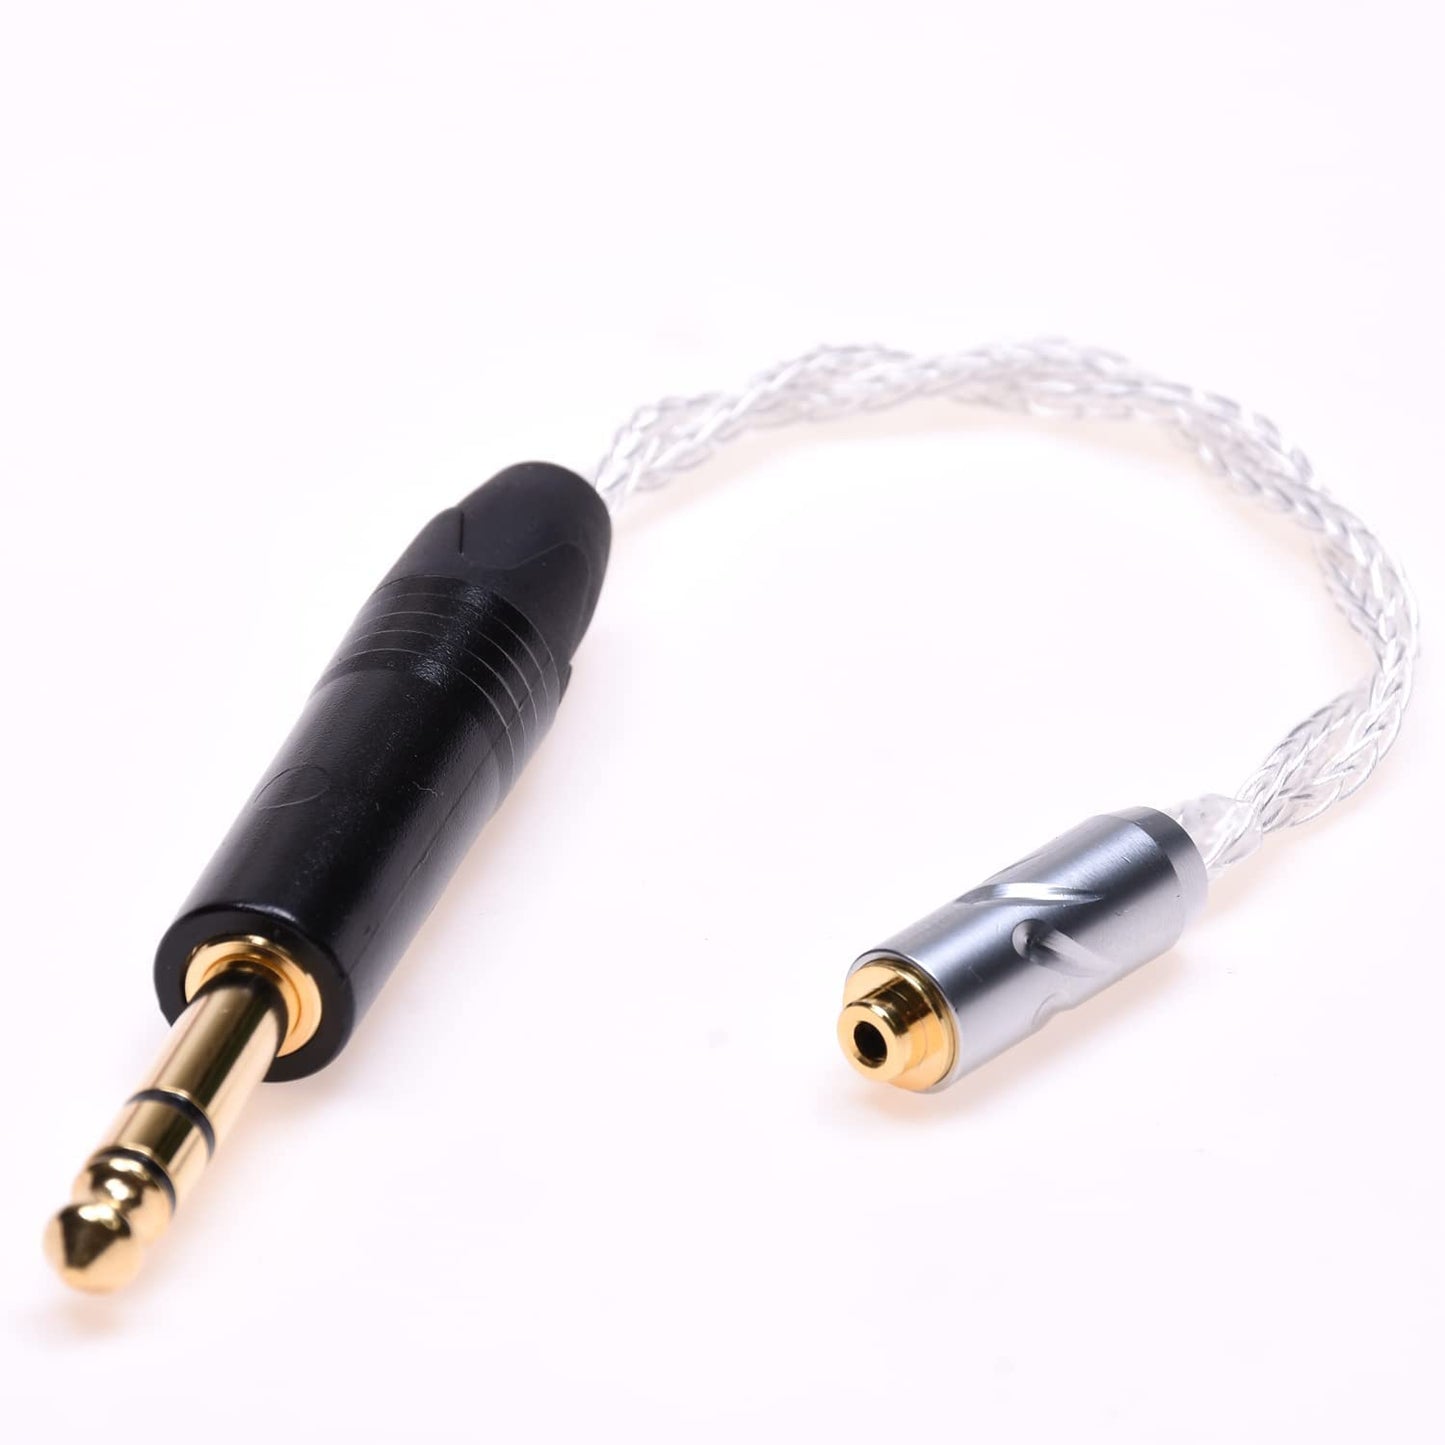 2.5mm Adapter 16 Cores Silver Plated Cable 1/4 6.35mm Male to 2.5mm Female trrs Balanced Audio Adapter Cable